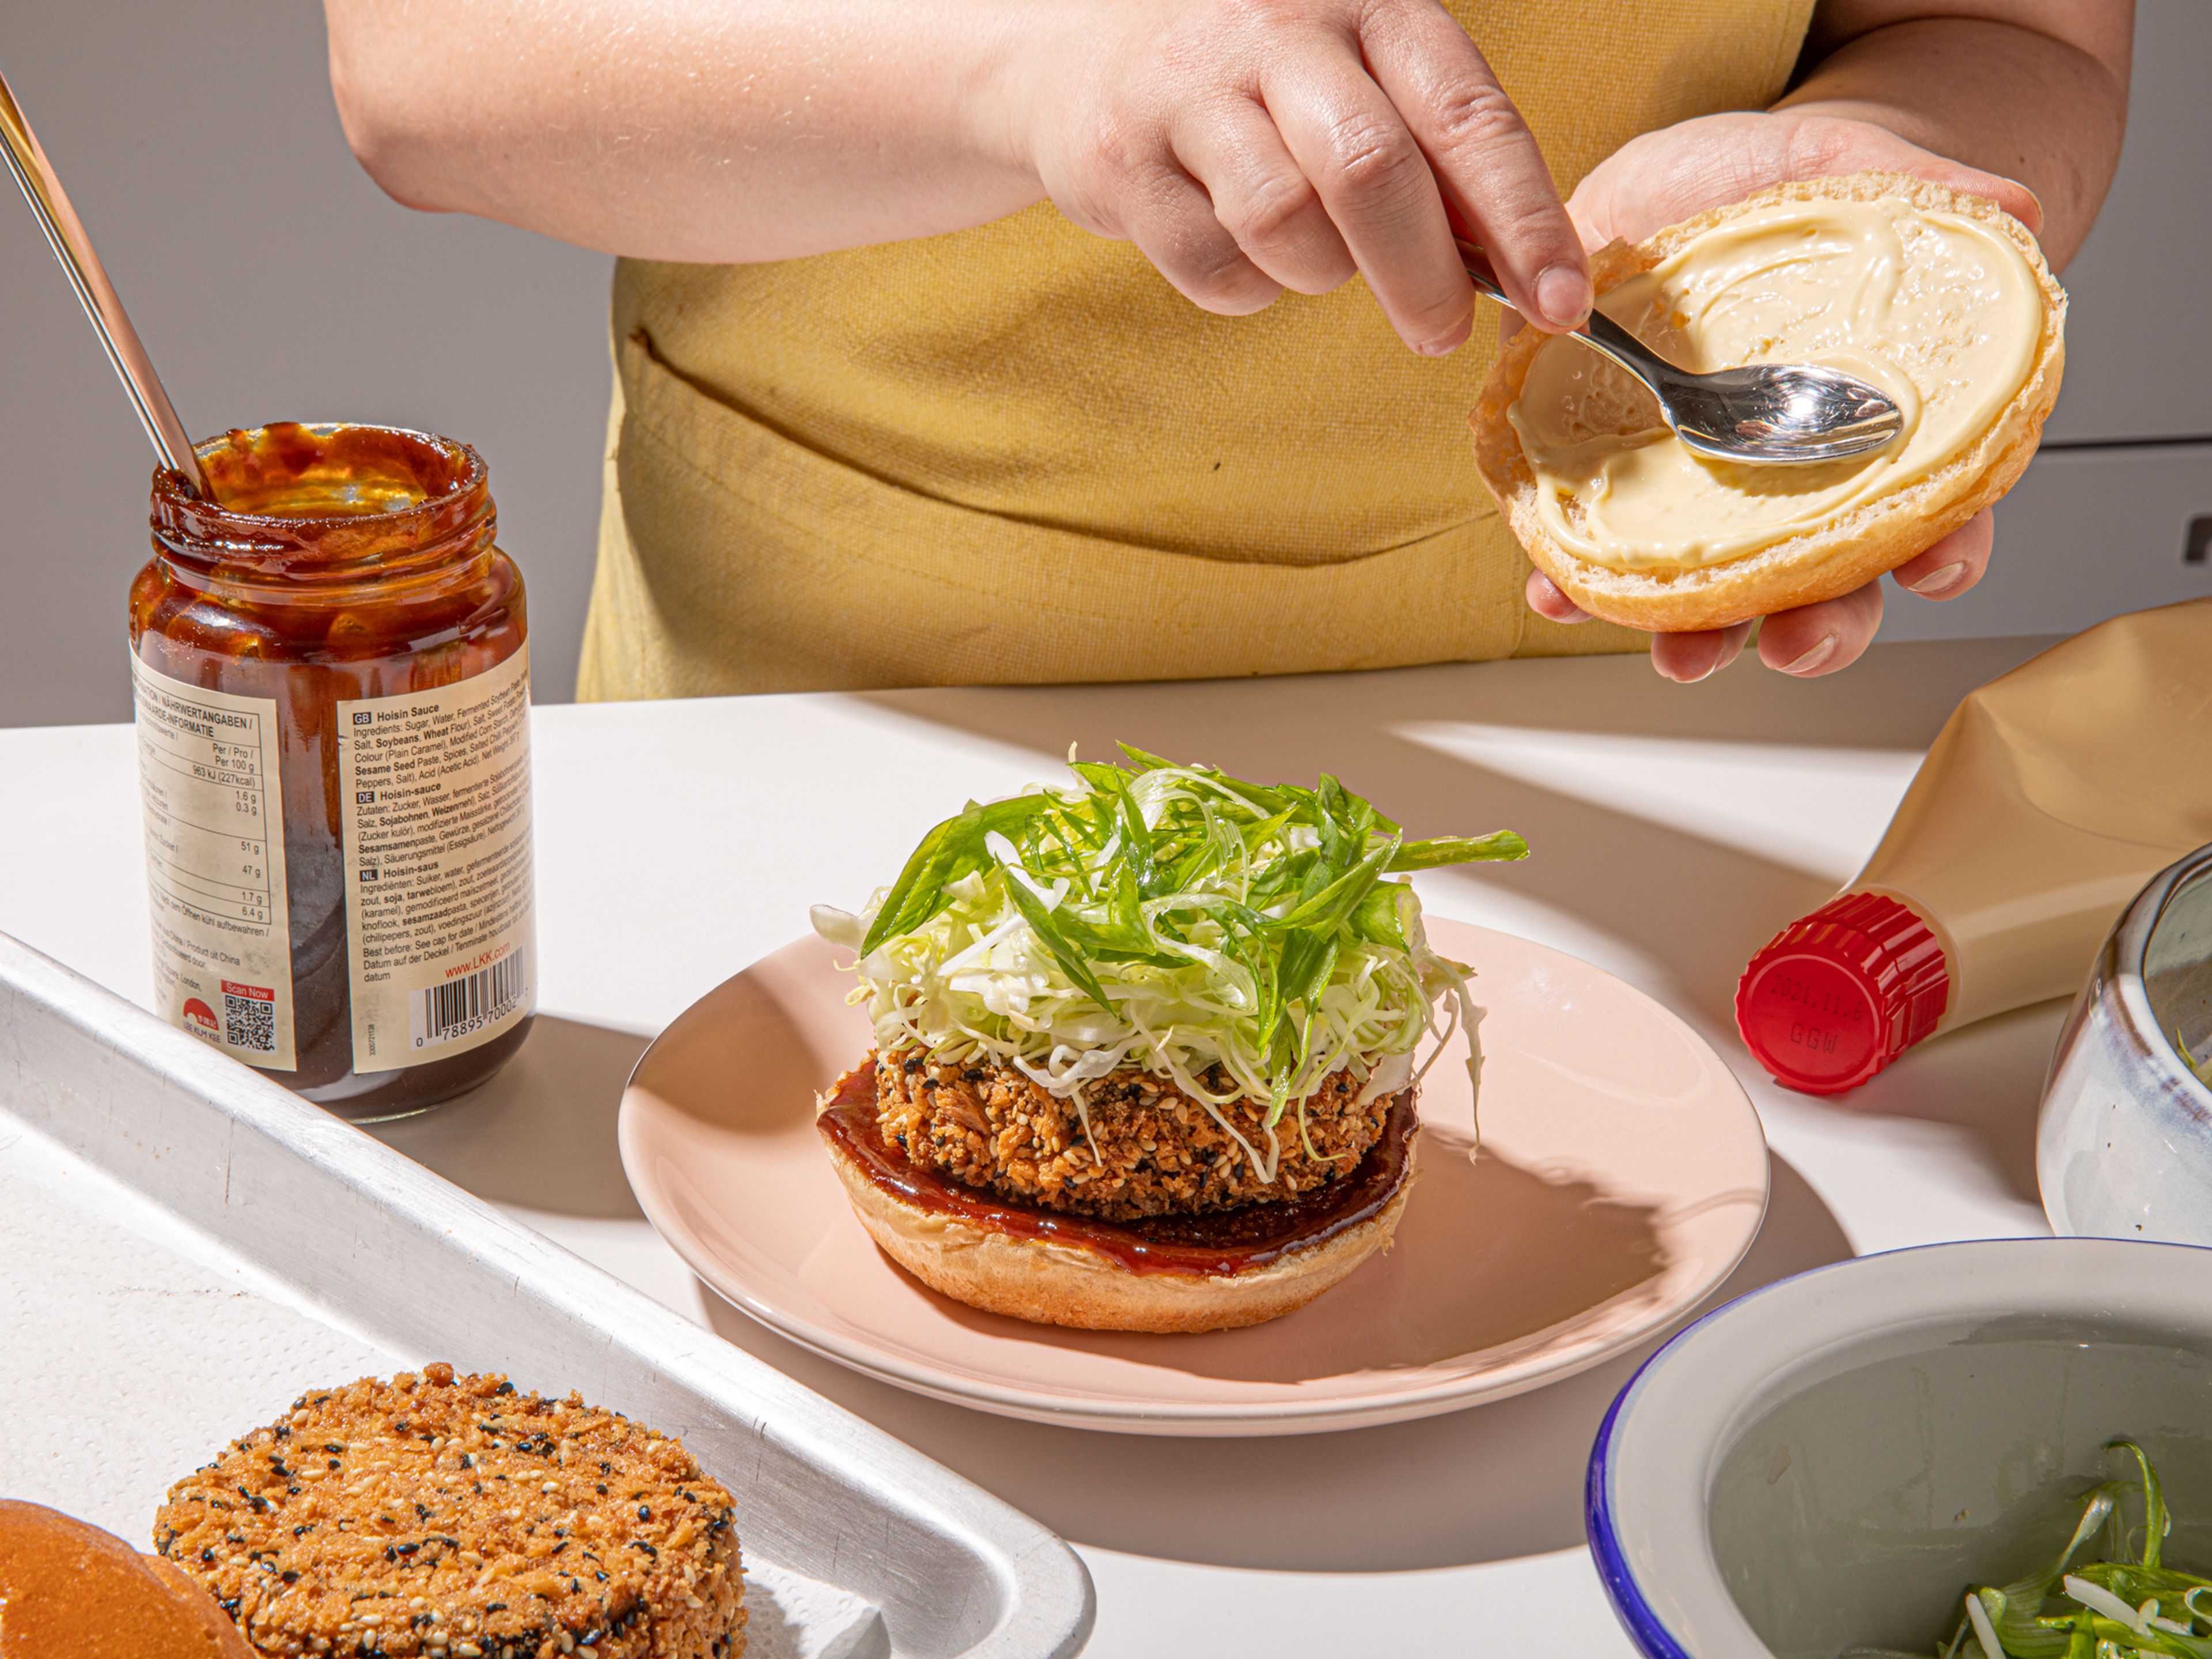 To serve, first toss the shredded cabbage with the rice vinegar and season with salt. Spread a thin layer of hoisin sauce on the base burger bun, top with the eggplant katsu patty, and add cabbage and spring onions on top. Spread kewpie mayo onto the burger lid, close the burger, and enjoy immediately!